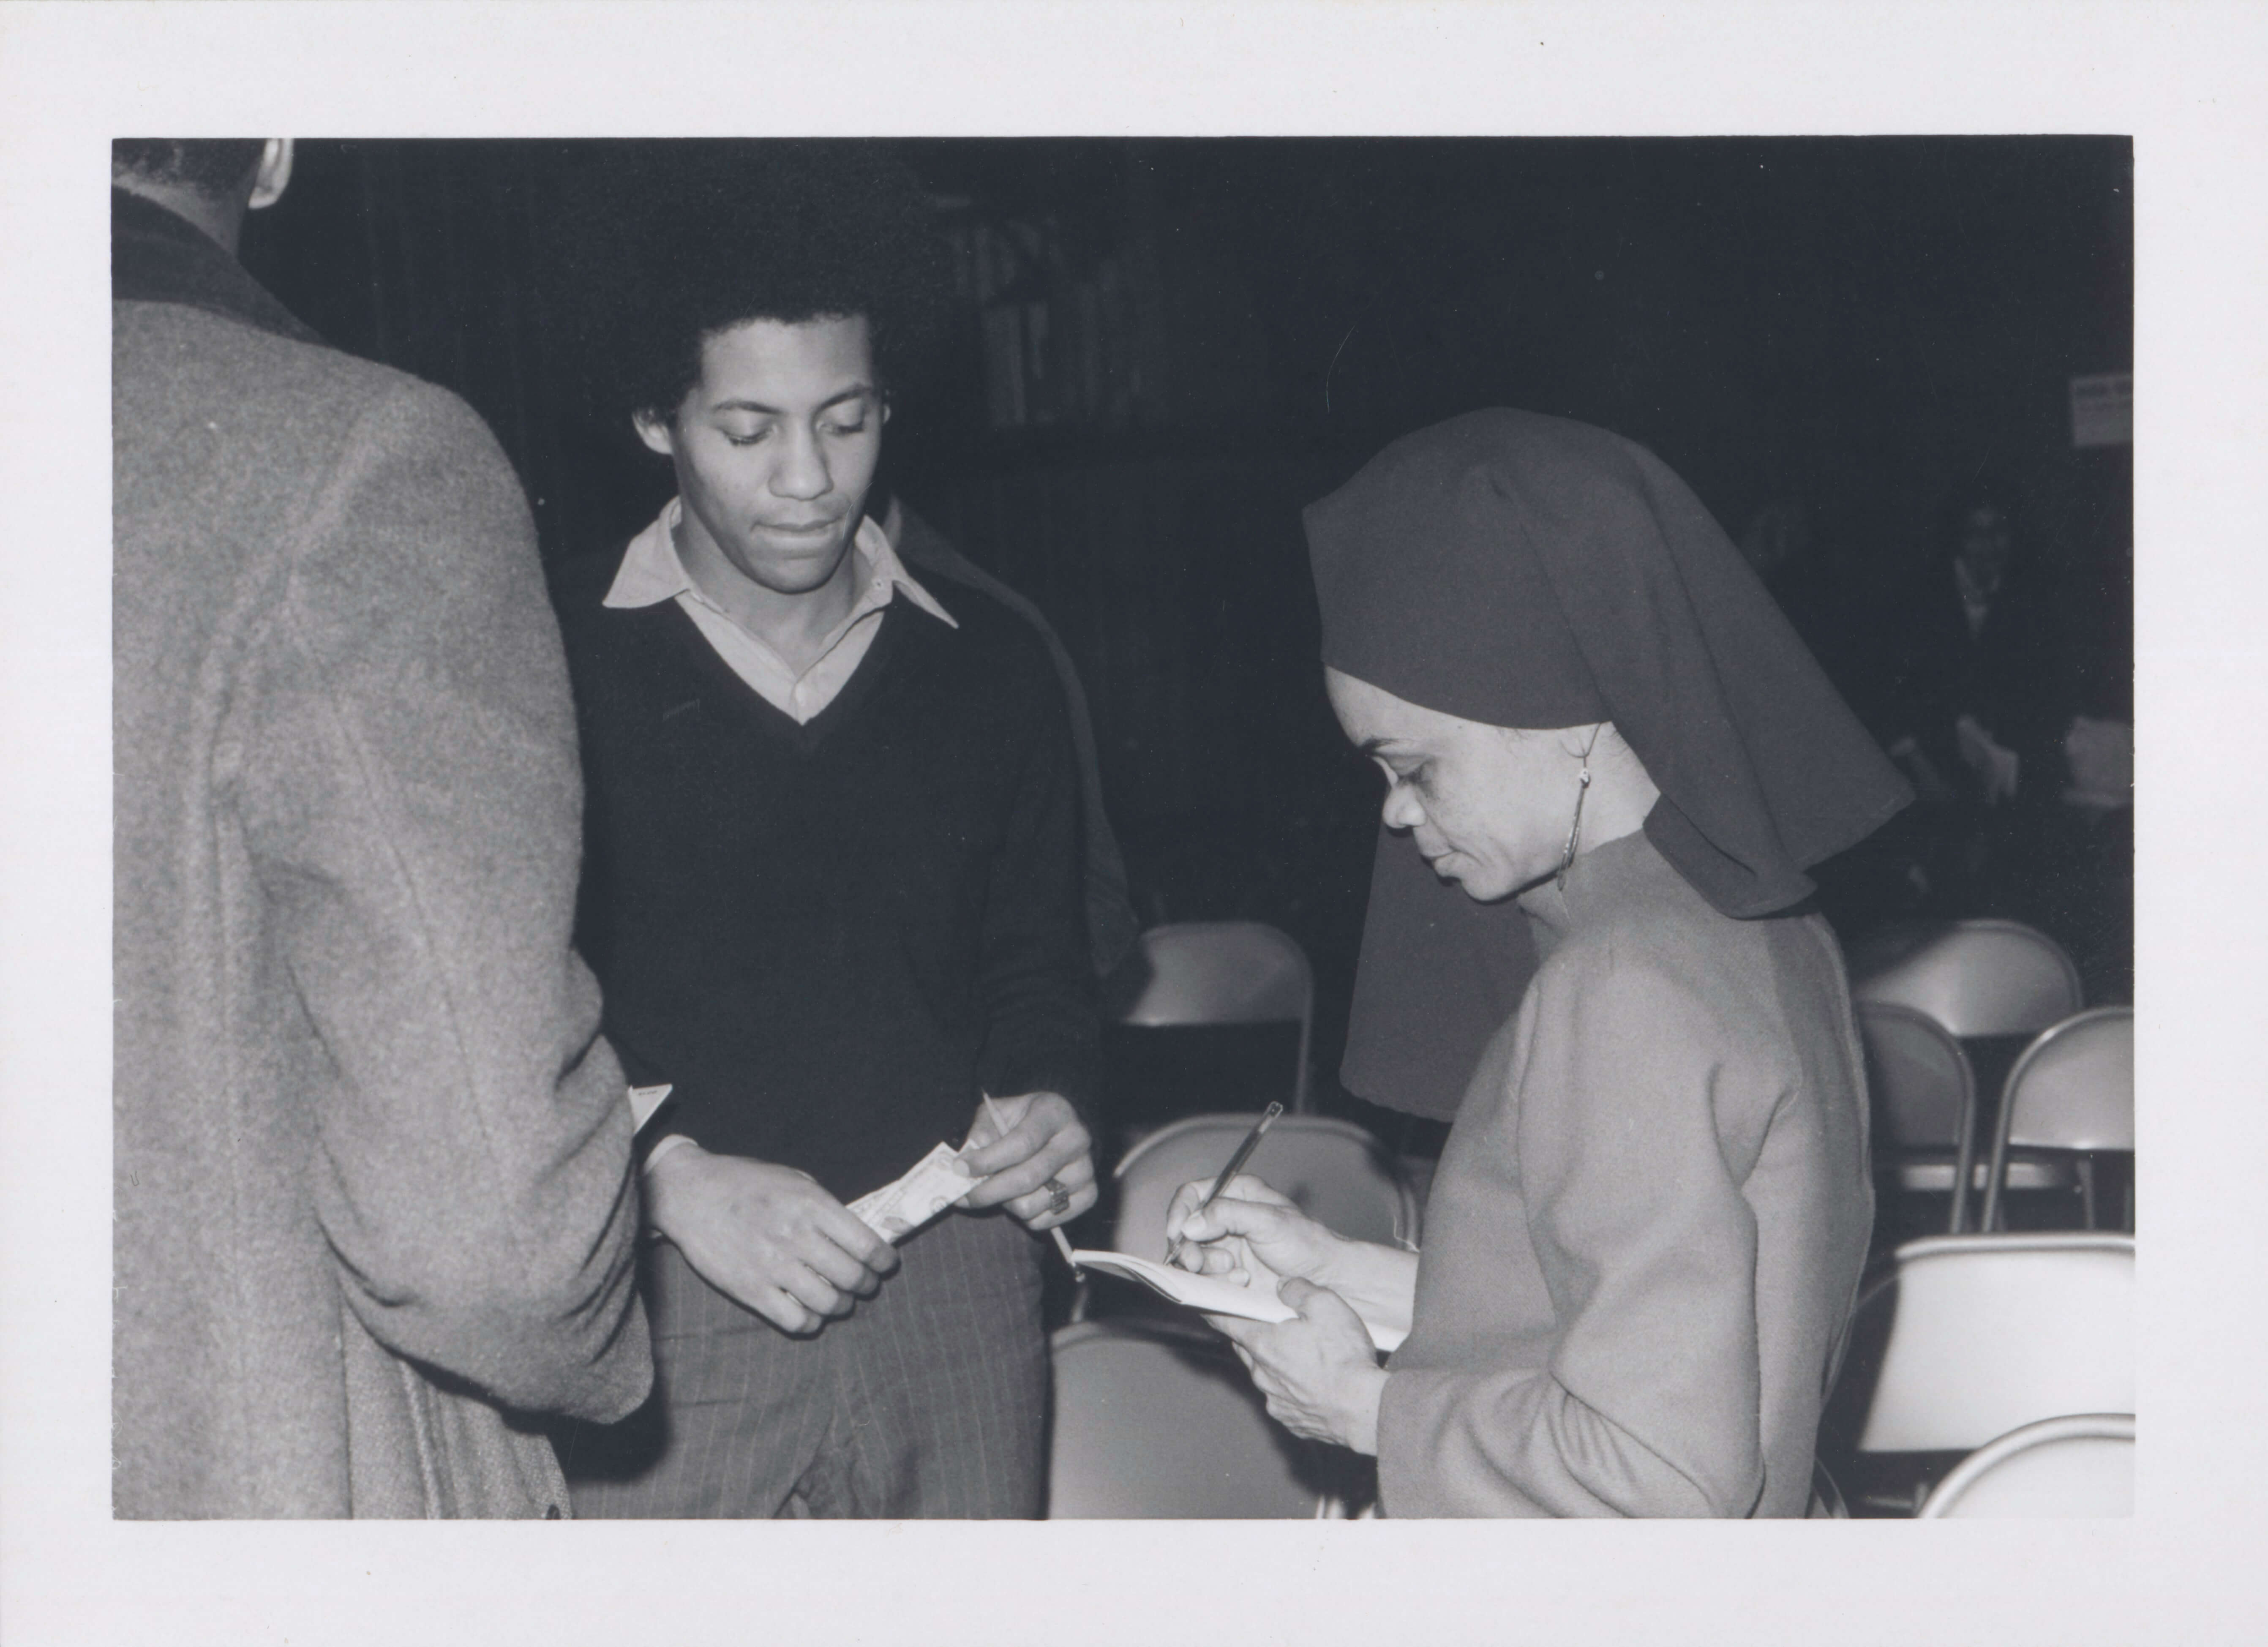 Black and white photograph of a woman signing an autograph for a man who is standing beside